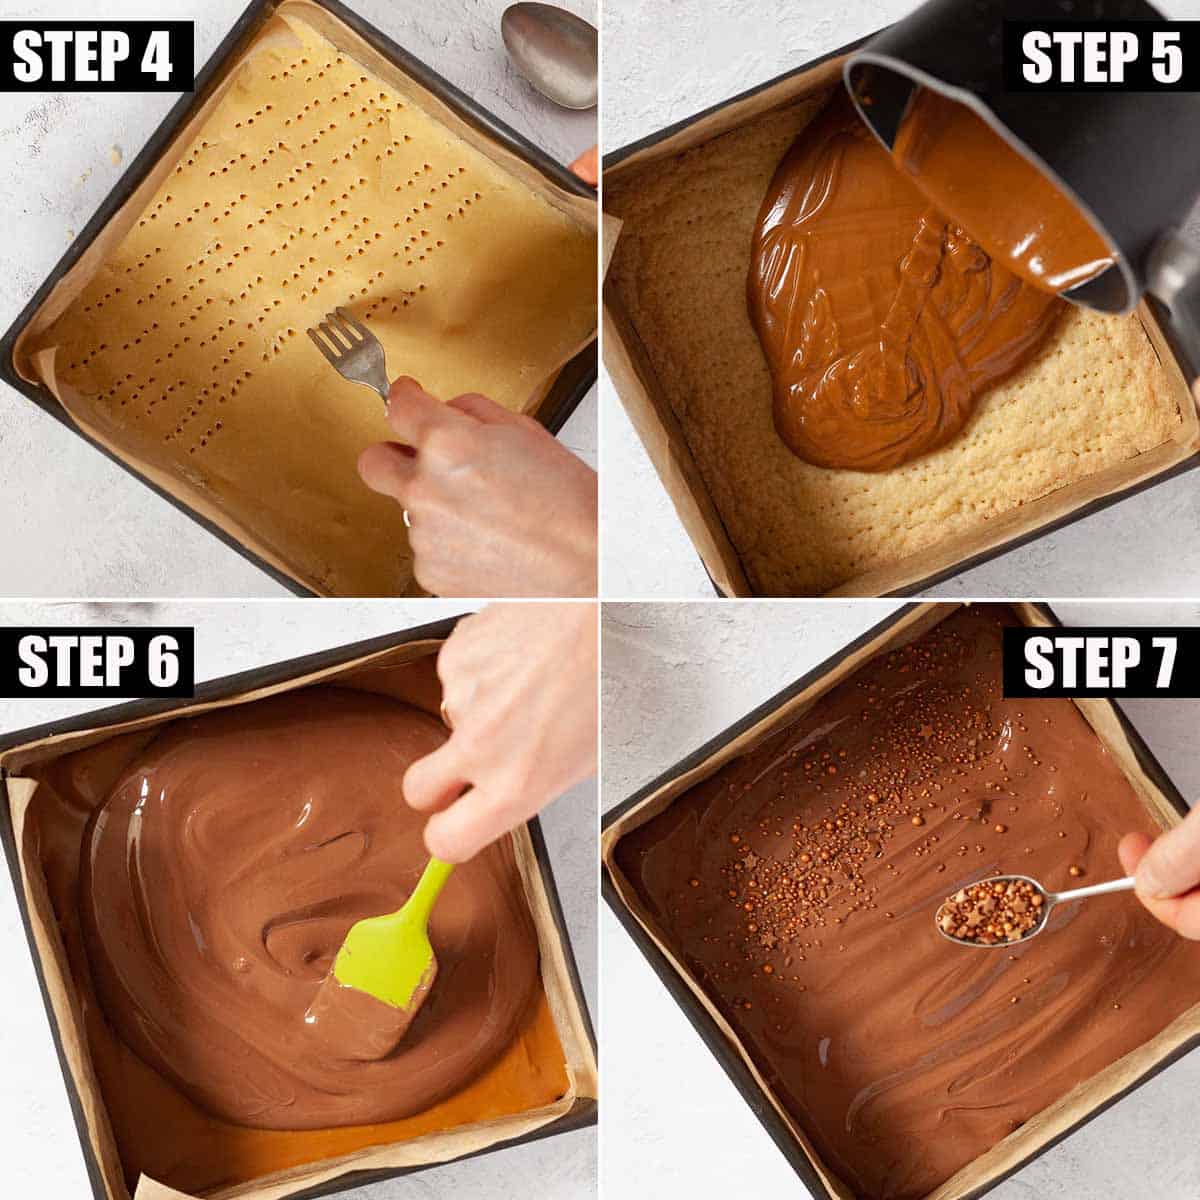 Collage of labeled image showing millionaire's shortbread being prepared.